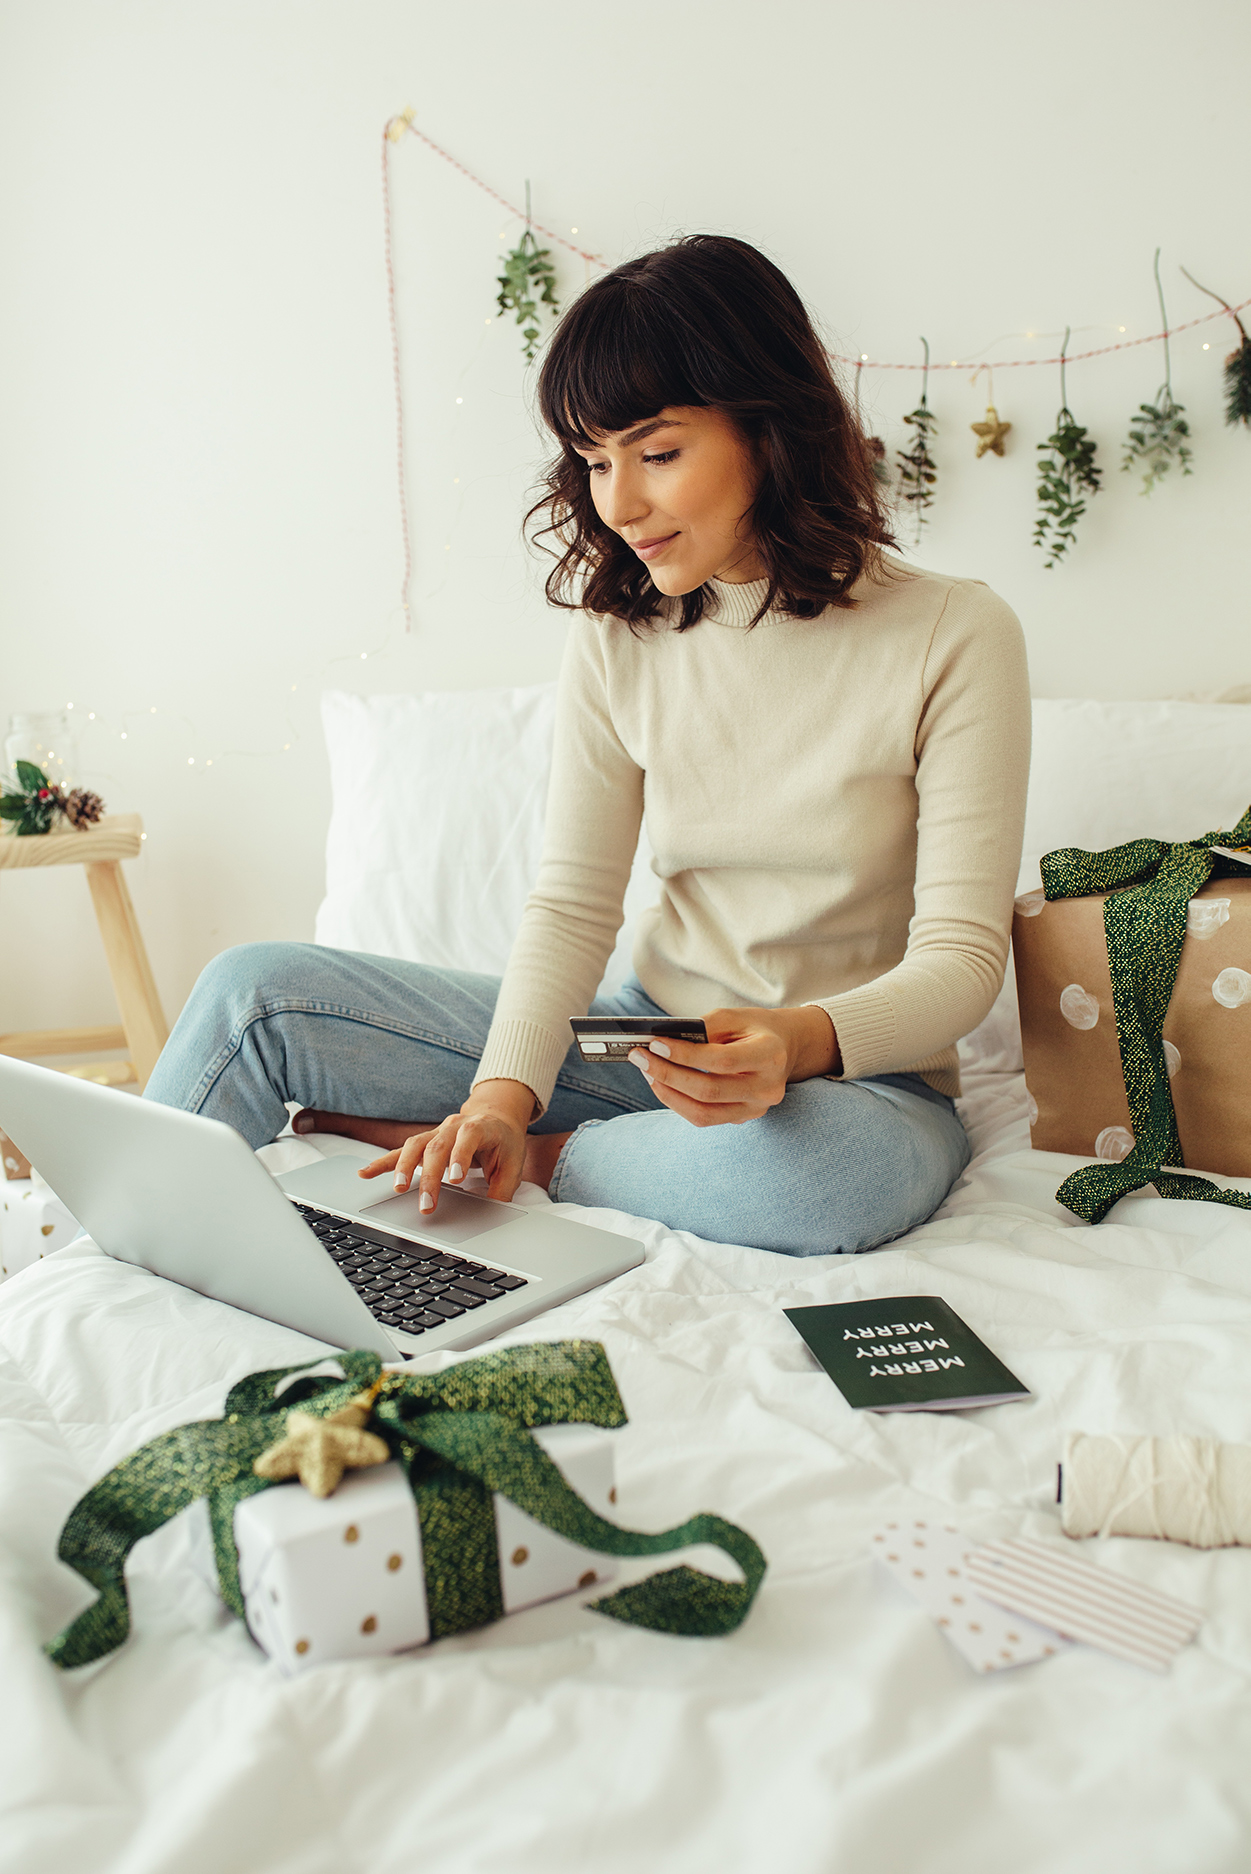 woman sittig on a bed doing some online shopping on her laptop with some beautifully wrapped gifts on the bed next to her, there are Christmas decorations on the wall.